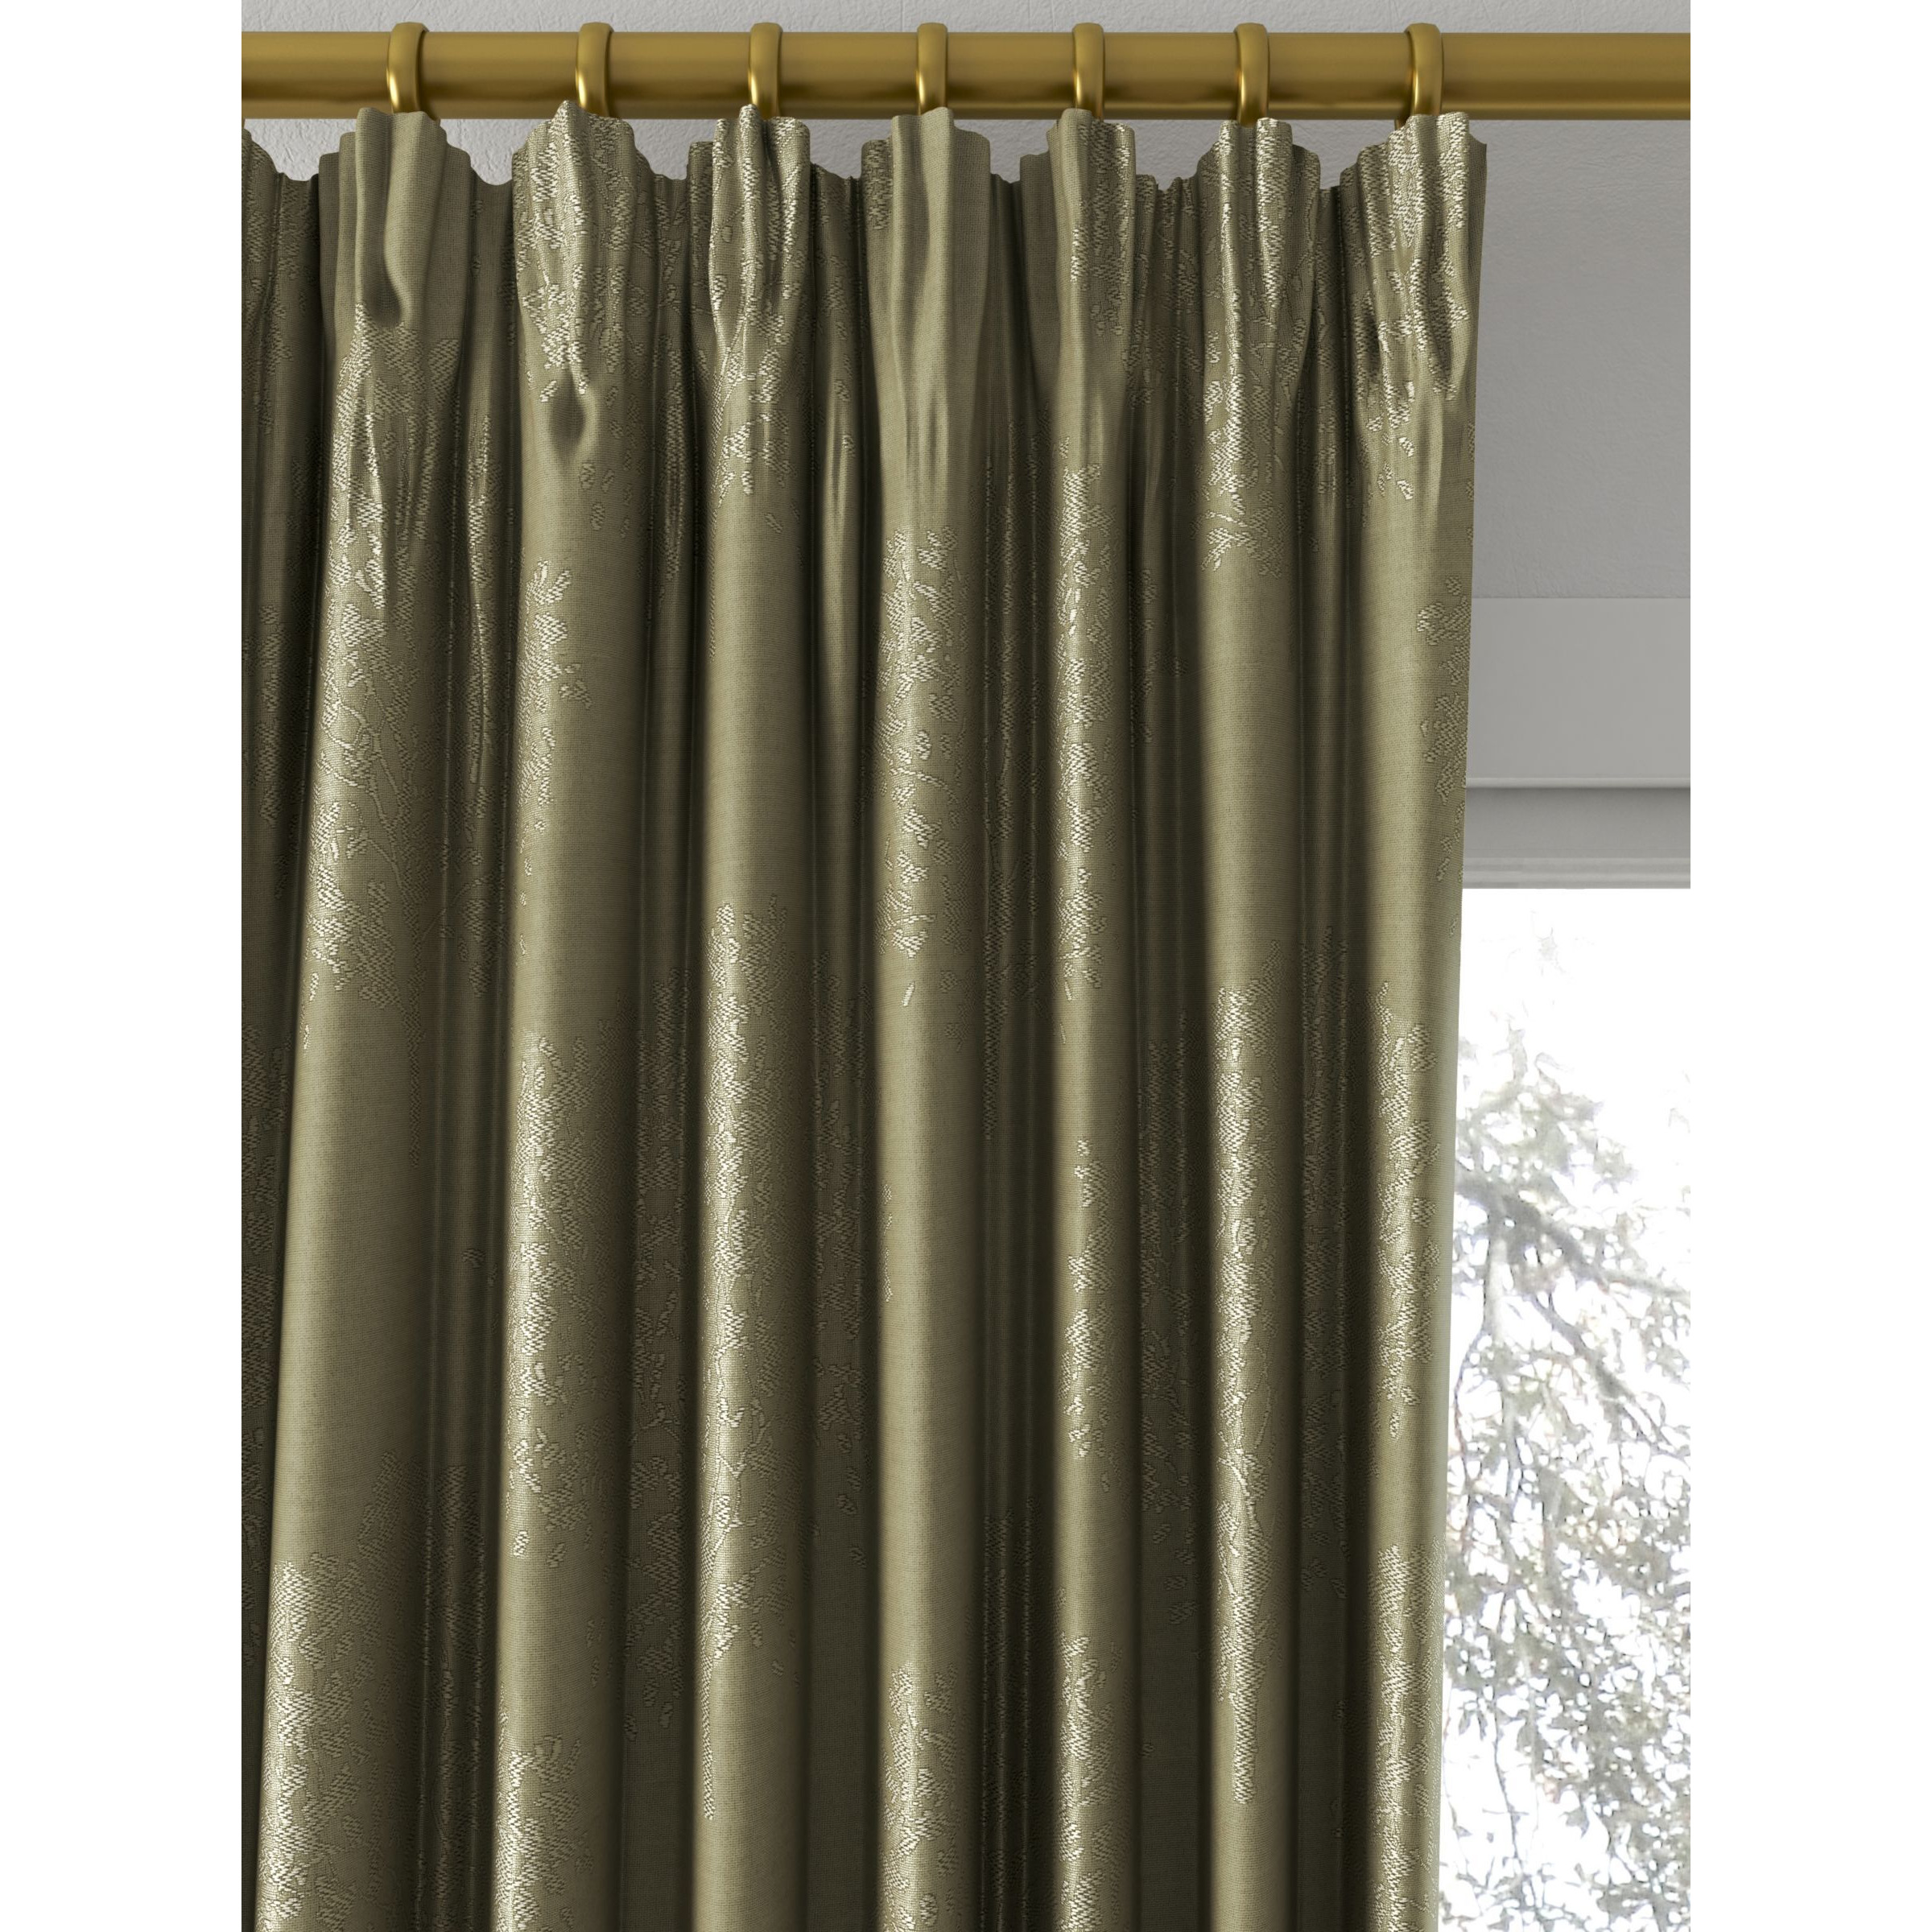 John Lewis Leckford Trees Tonal Weave Pair Lined Pencil Pleat Curtains, Loden Green - image 1